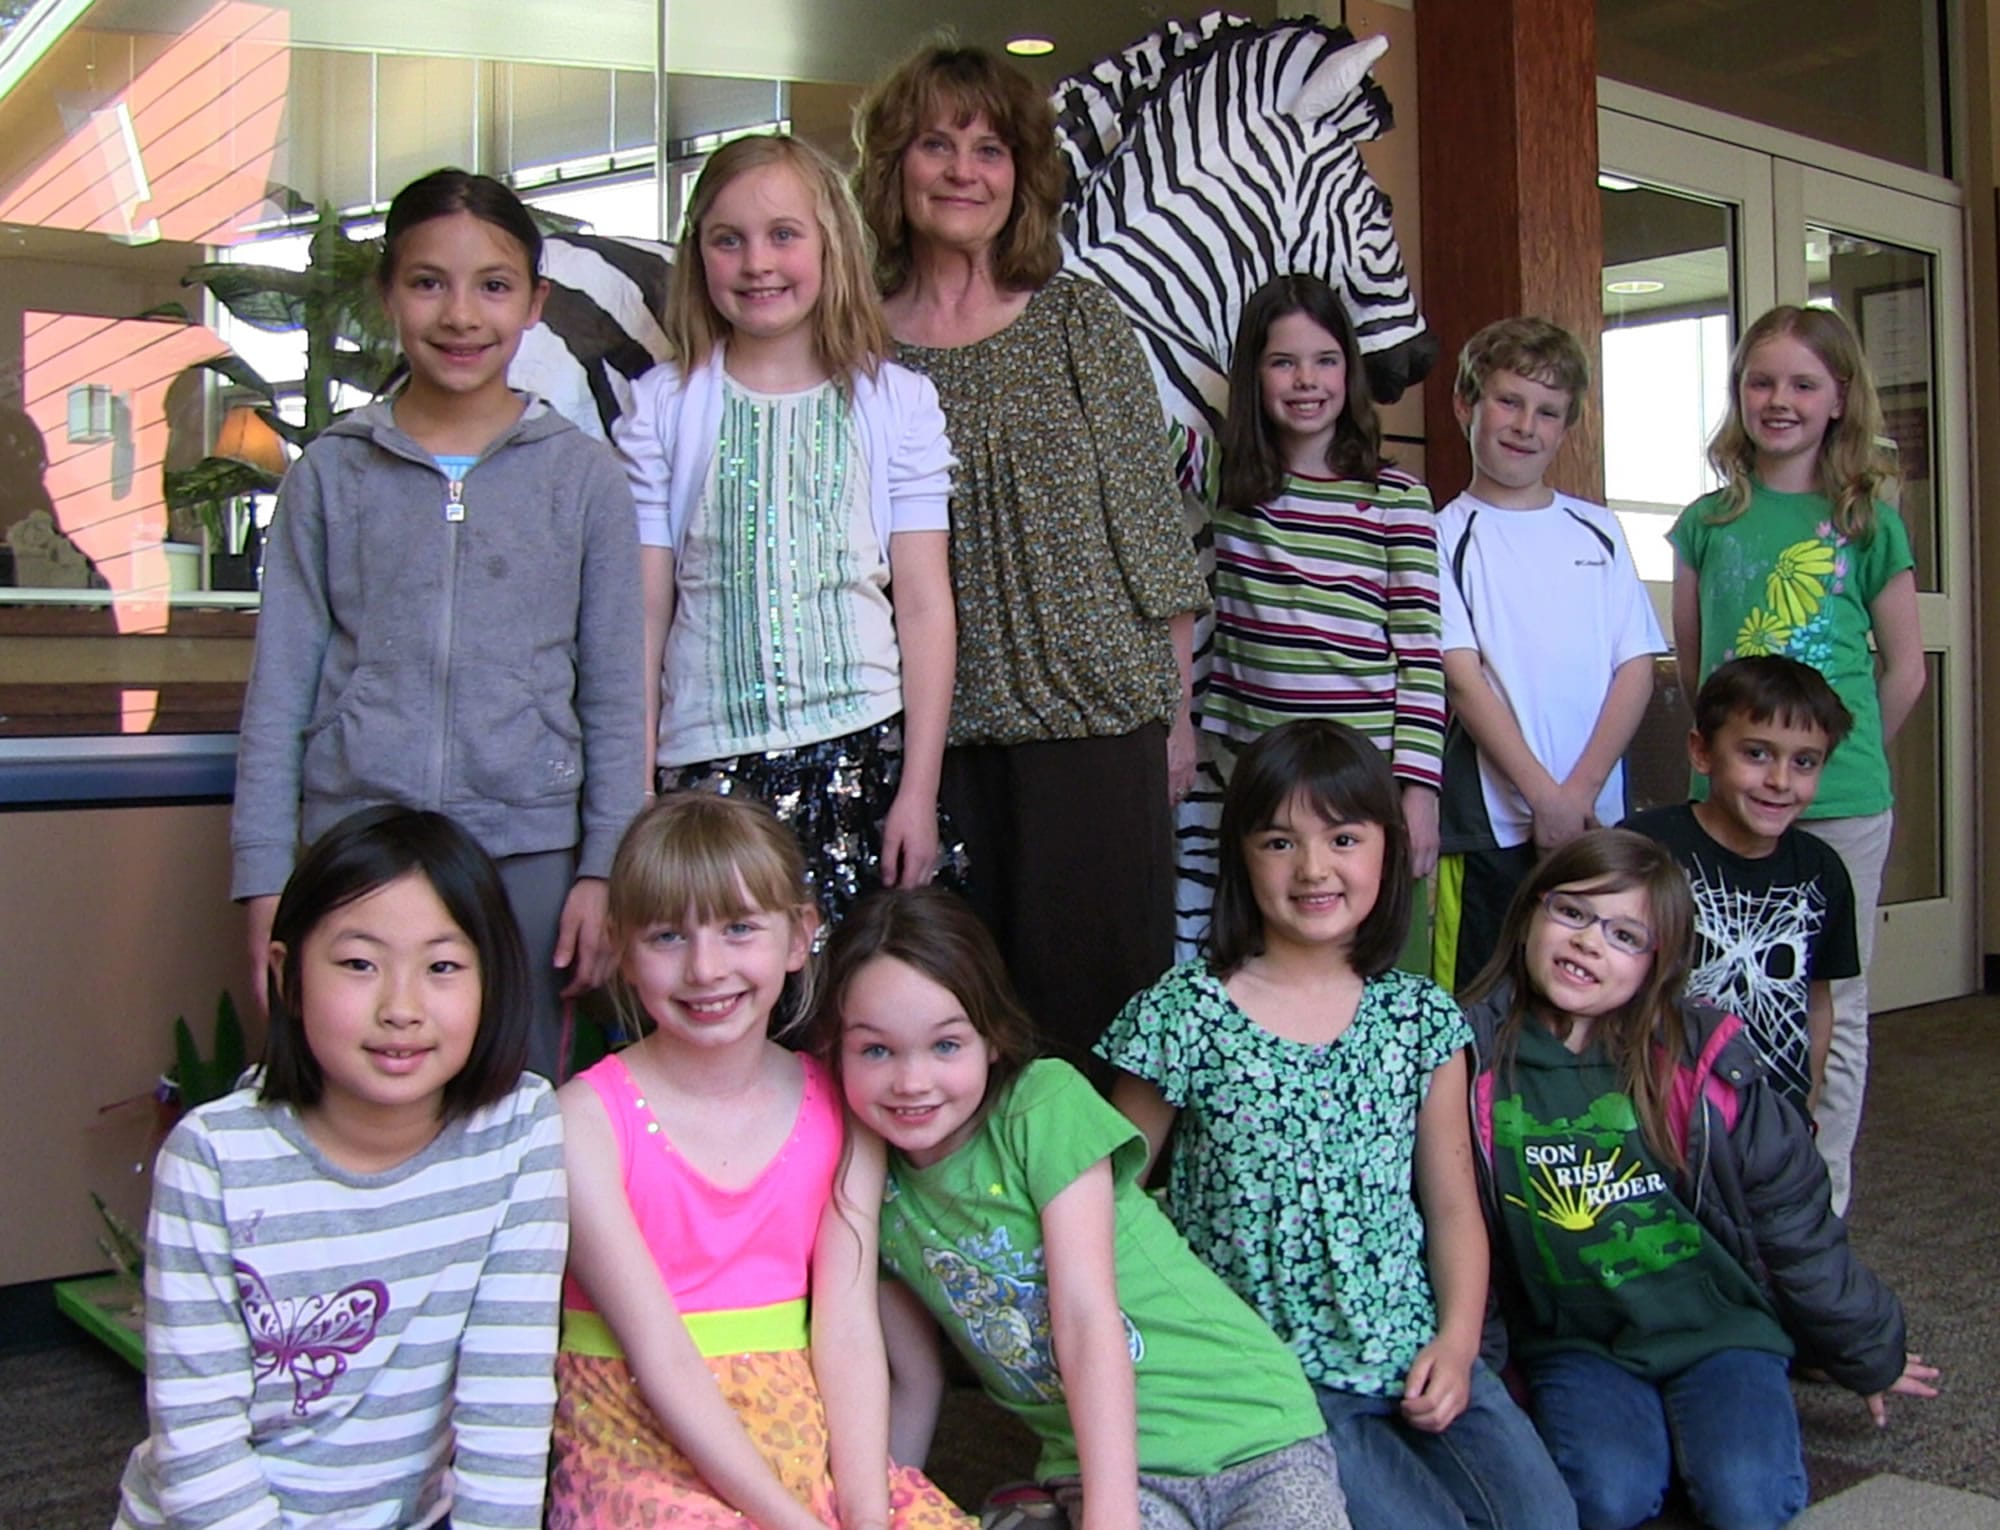 Grass Valley: First-grade teacher Julie Della Valle, seen here with members of the school's Eco Officers Club, won a &quot;Make Every Day Earth Day&quot; award from Clark County Environmental Services.